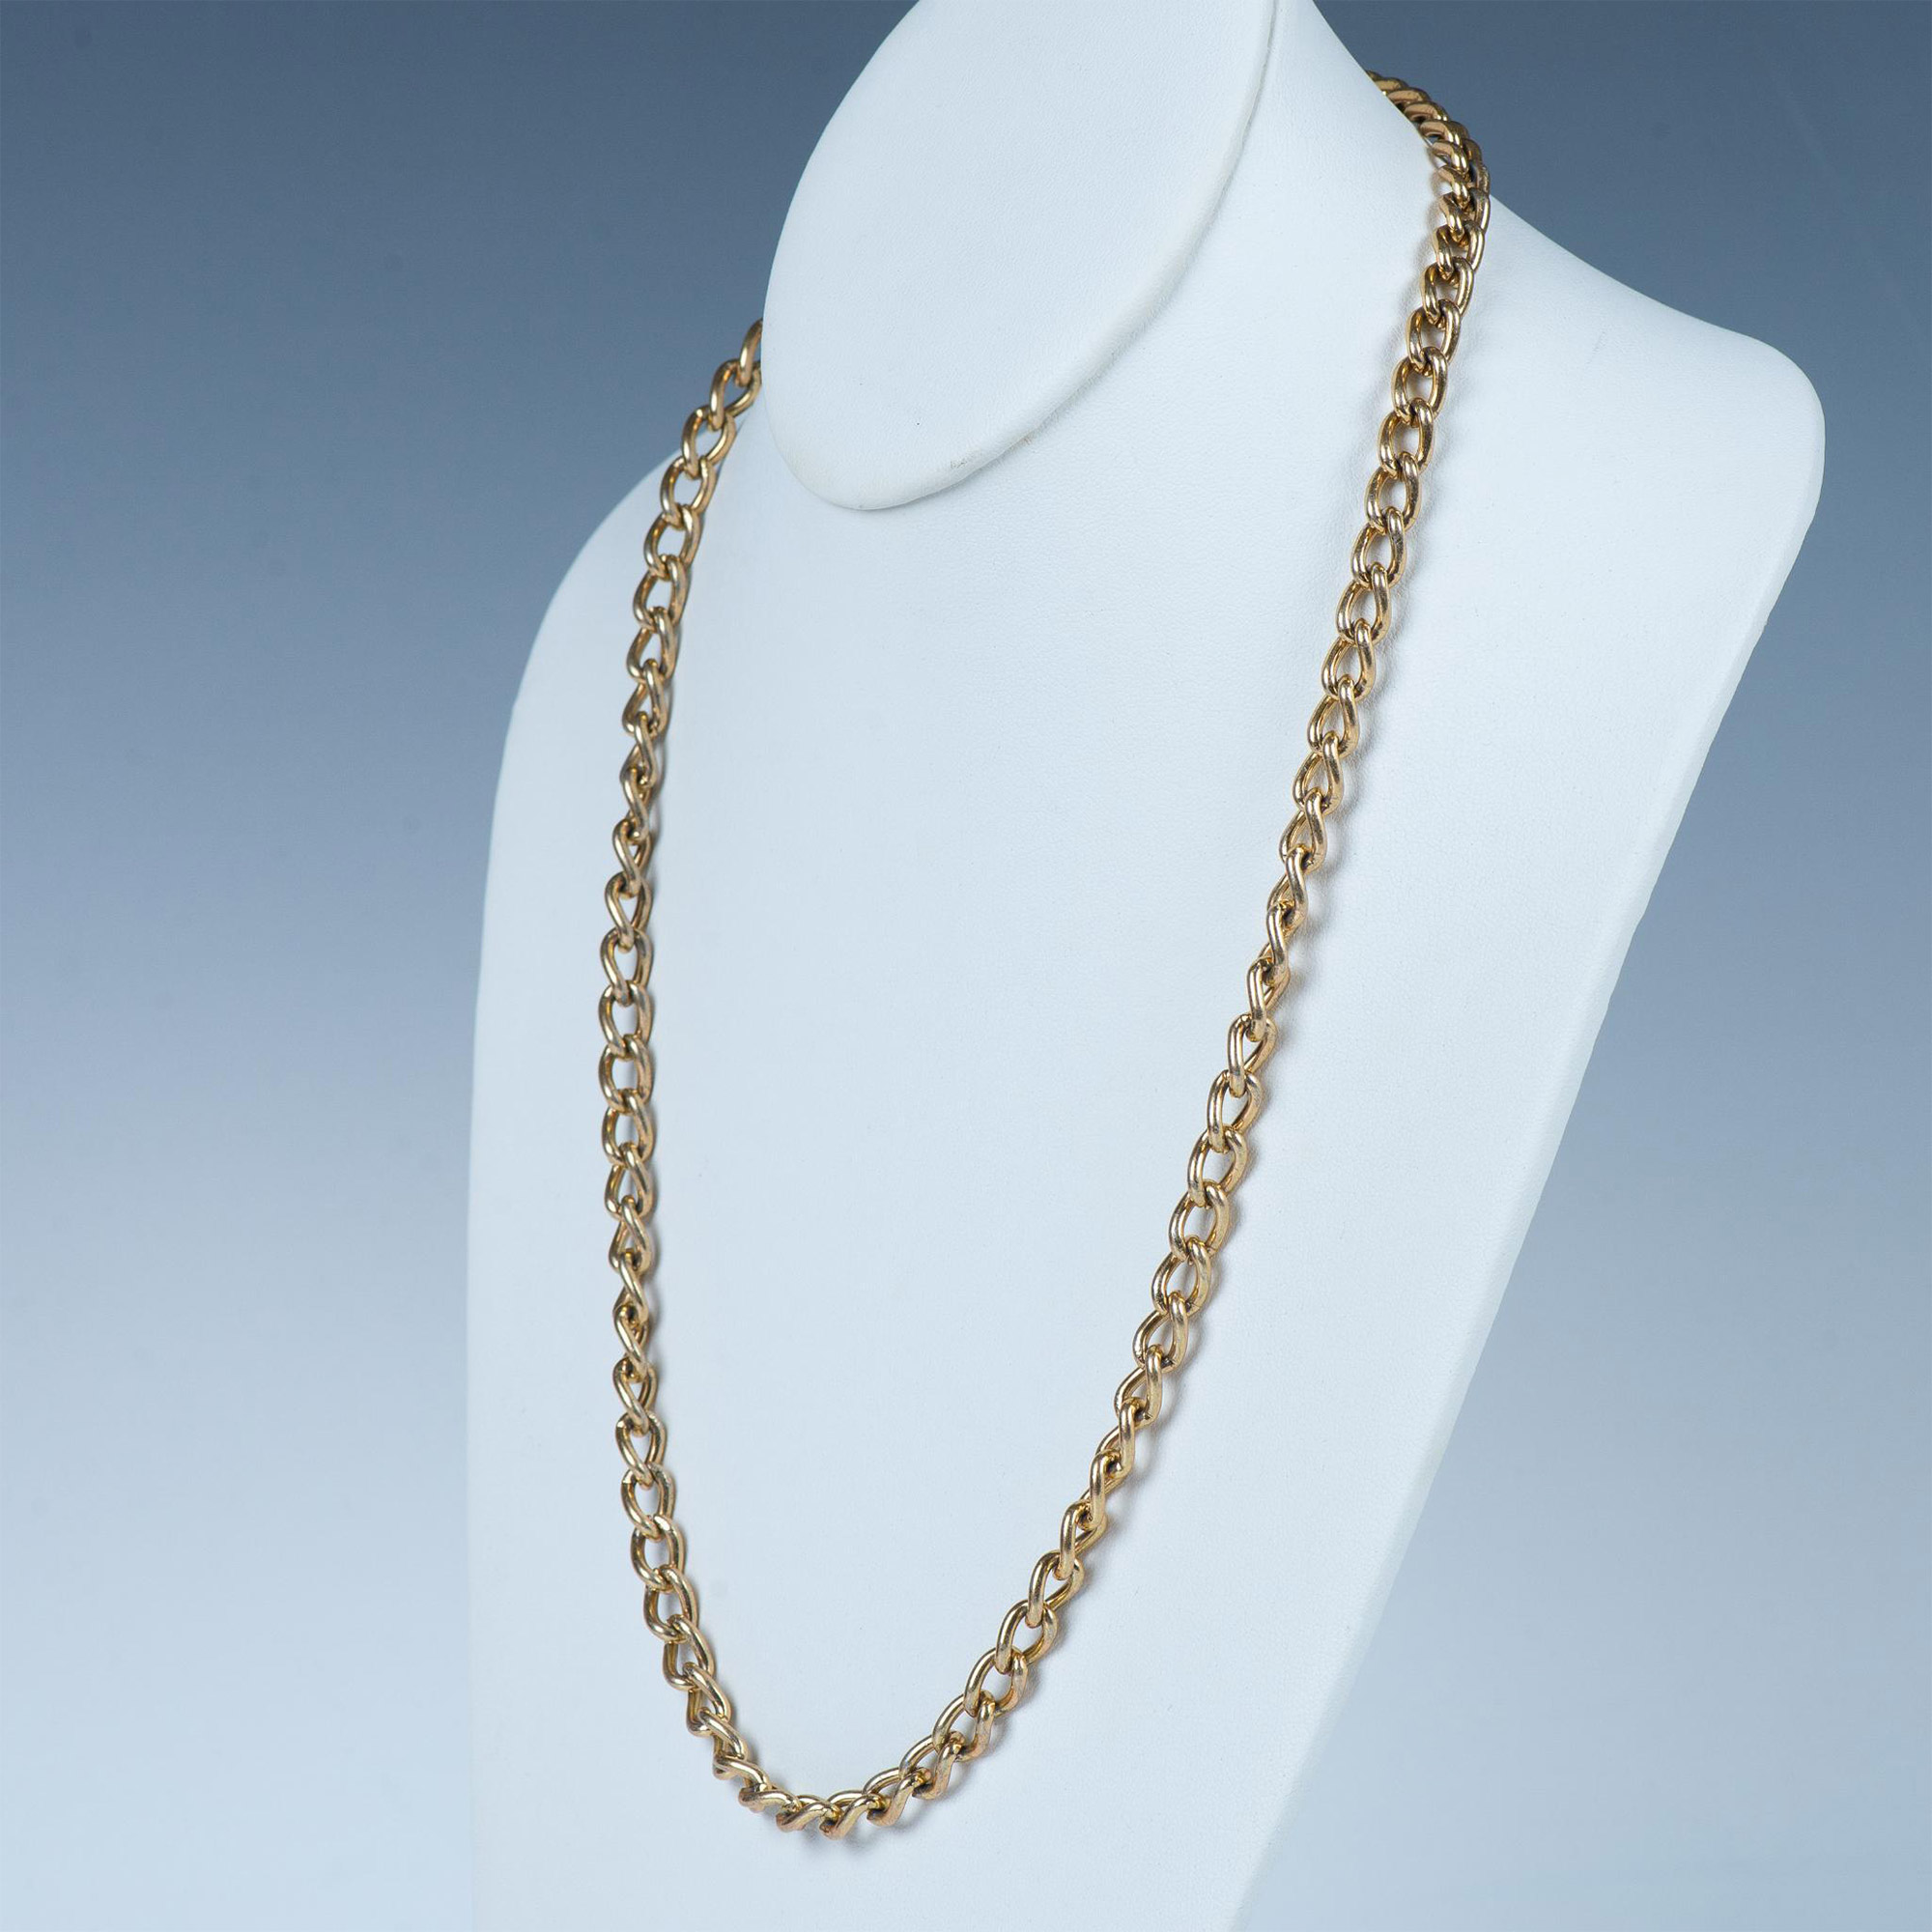 Nice Gold Tone Necklace Chain - Image 2 of 5